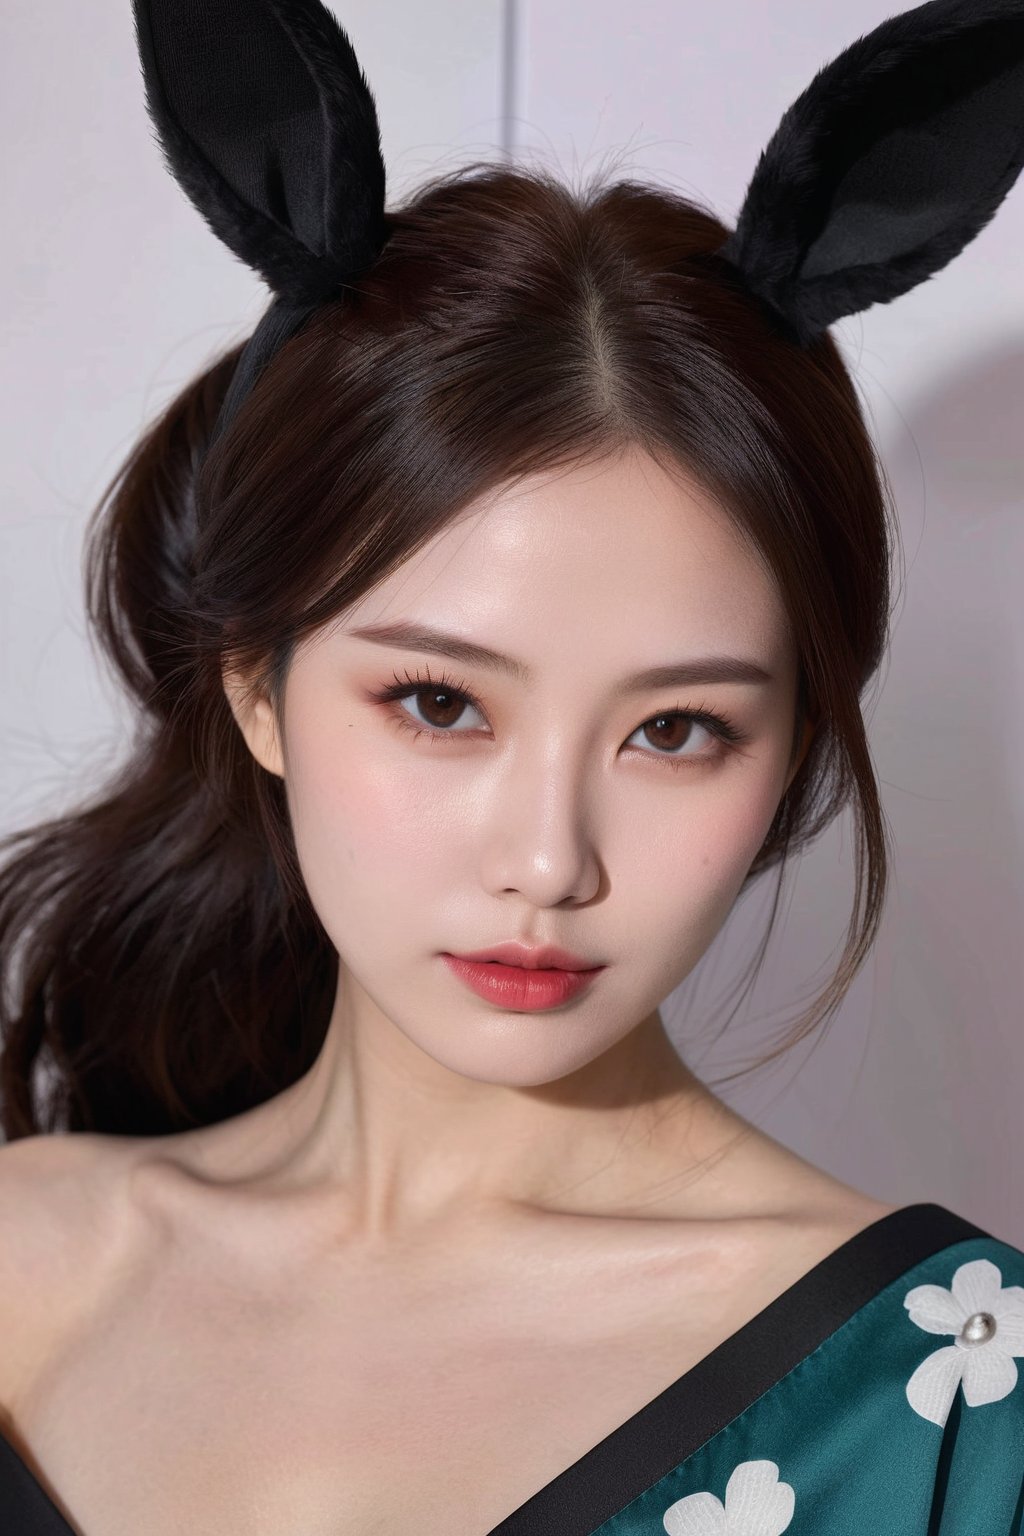 (ultra realistic,best quality),hubgwomen,masterpiece, 8k, hq, 1 girl,photorealistic,Extremely Realistic, in depth, cinematic light,hubggirl, red eyes, black hair, hair bun with accessories, traditional East Asian attire, rabbit ears headpiece, black and teal clothing, cloud pattern on garment, mystical, two black rabbits, one on shoulder and one in foreground, pale skin, blush on cheeks, serious expression, white background, portrait, upper body shot, artful composition, detailed line art, vibrant color contrast., ,HUBGGIRL